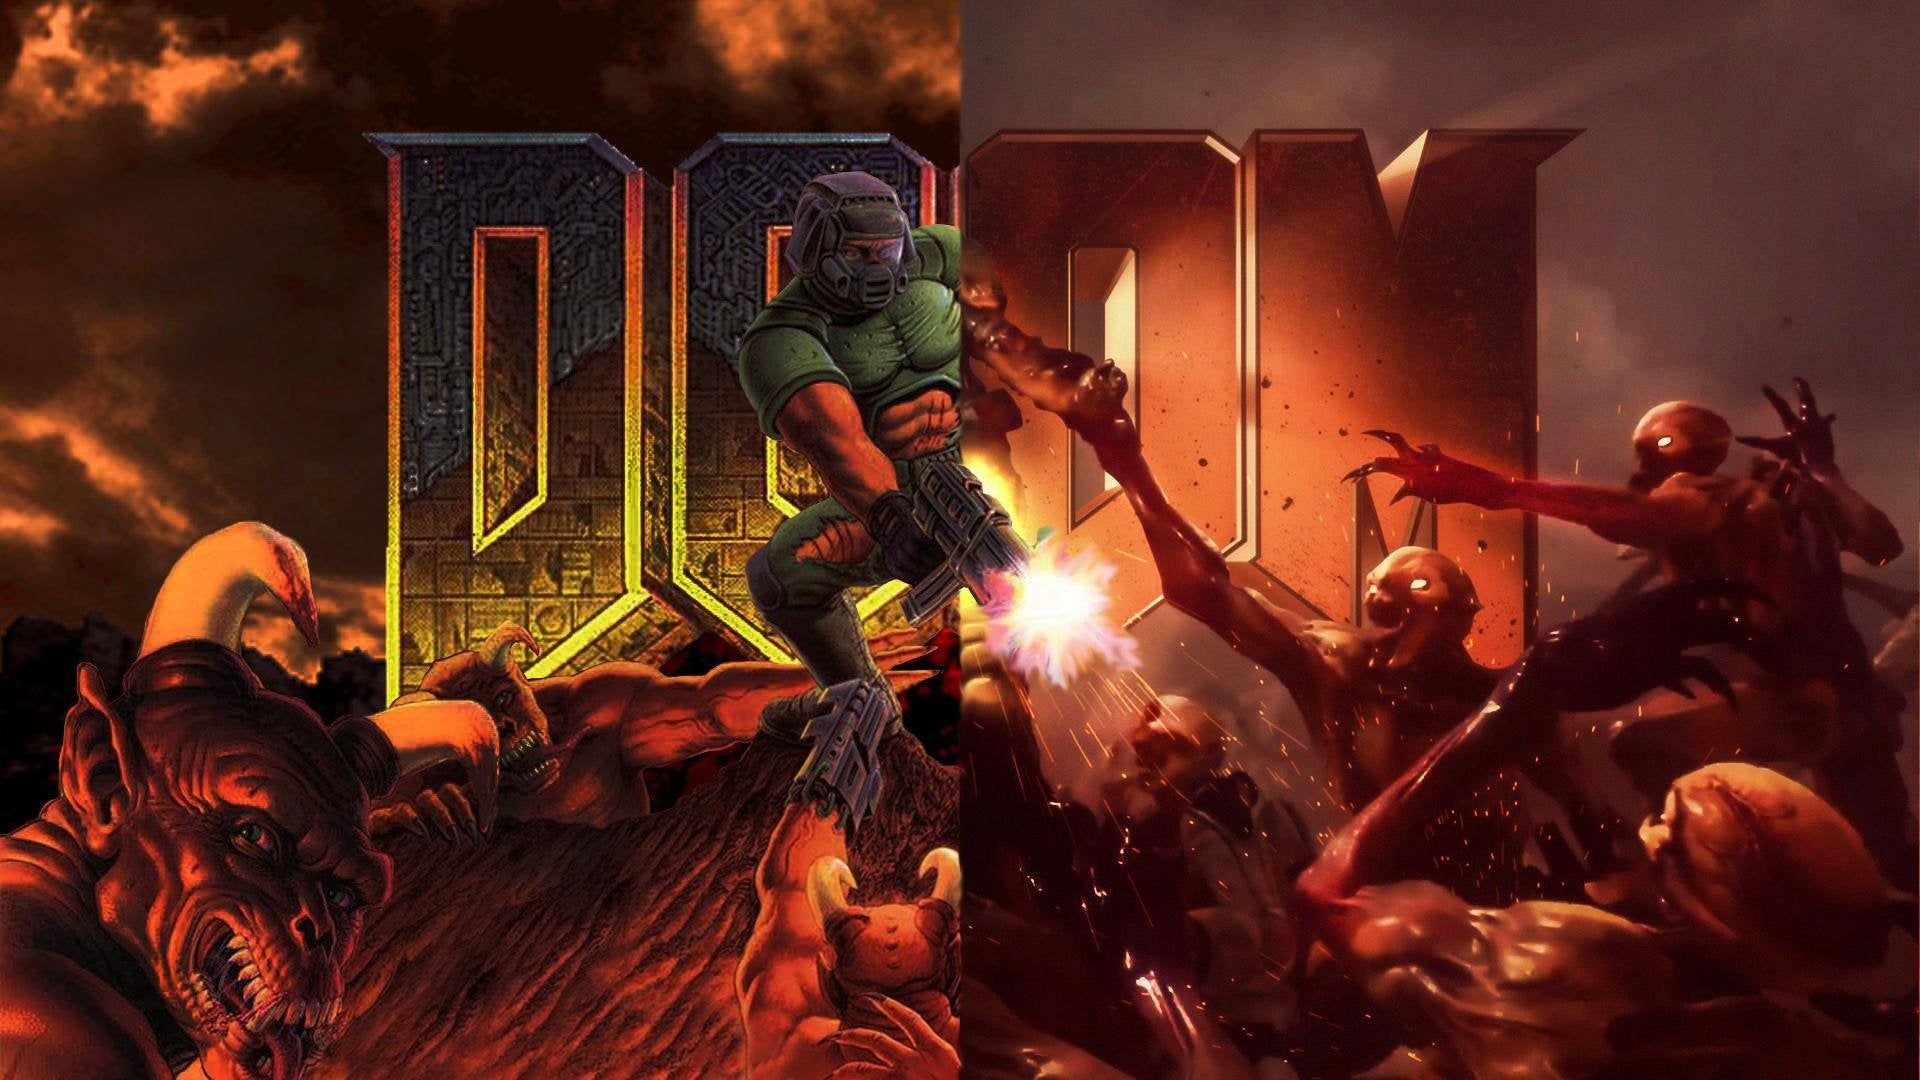 I Mixed the Classic Doom Wallpaper with the New One!